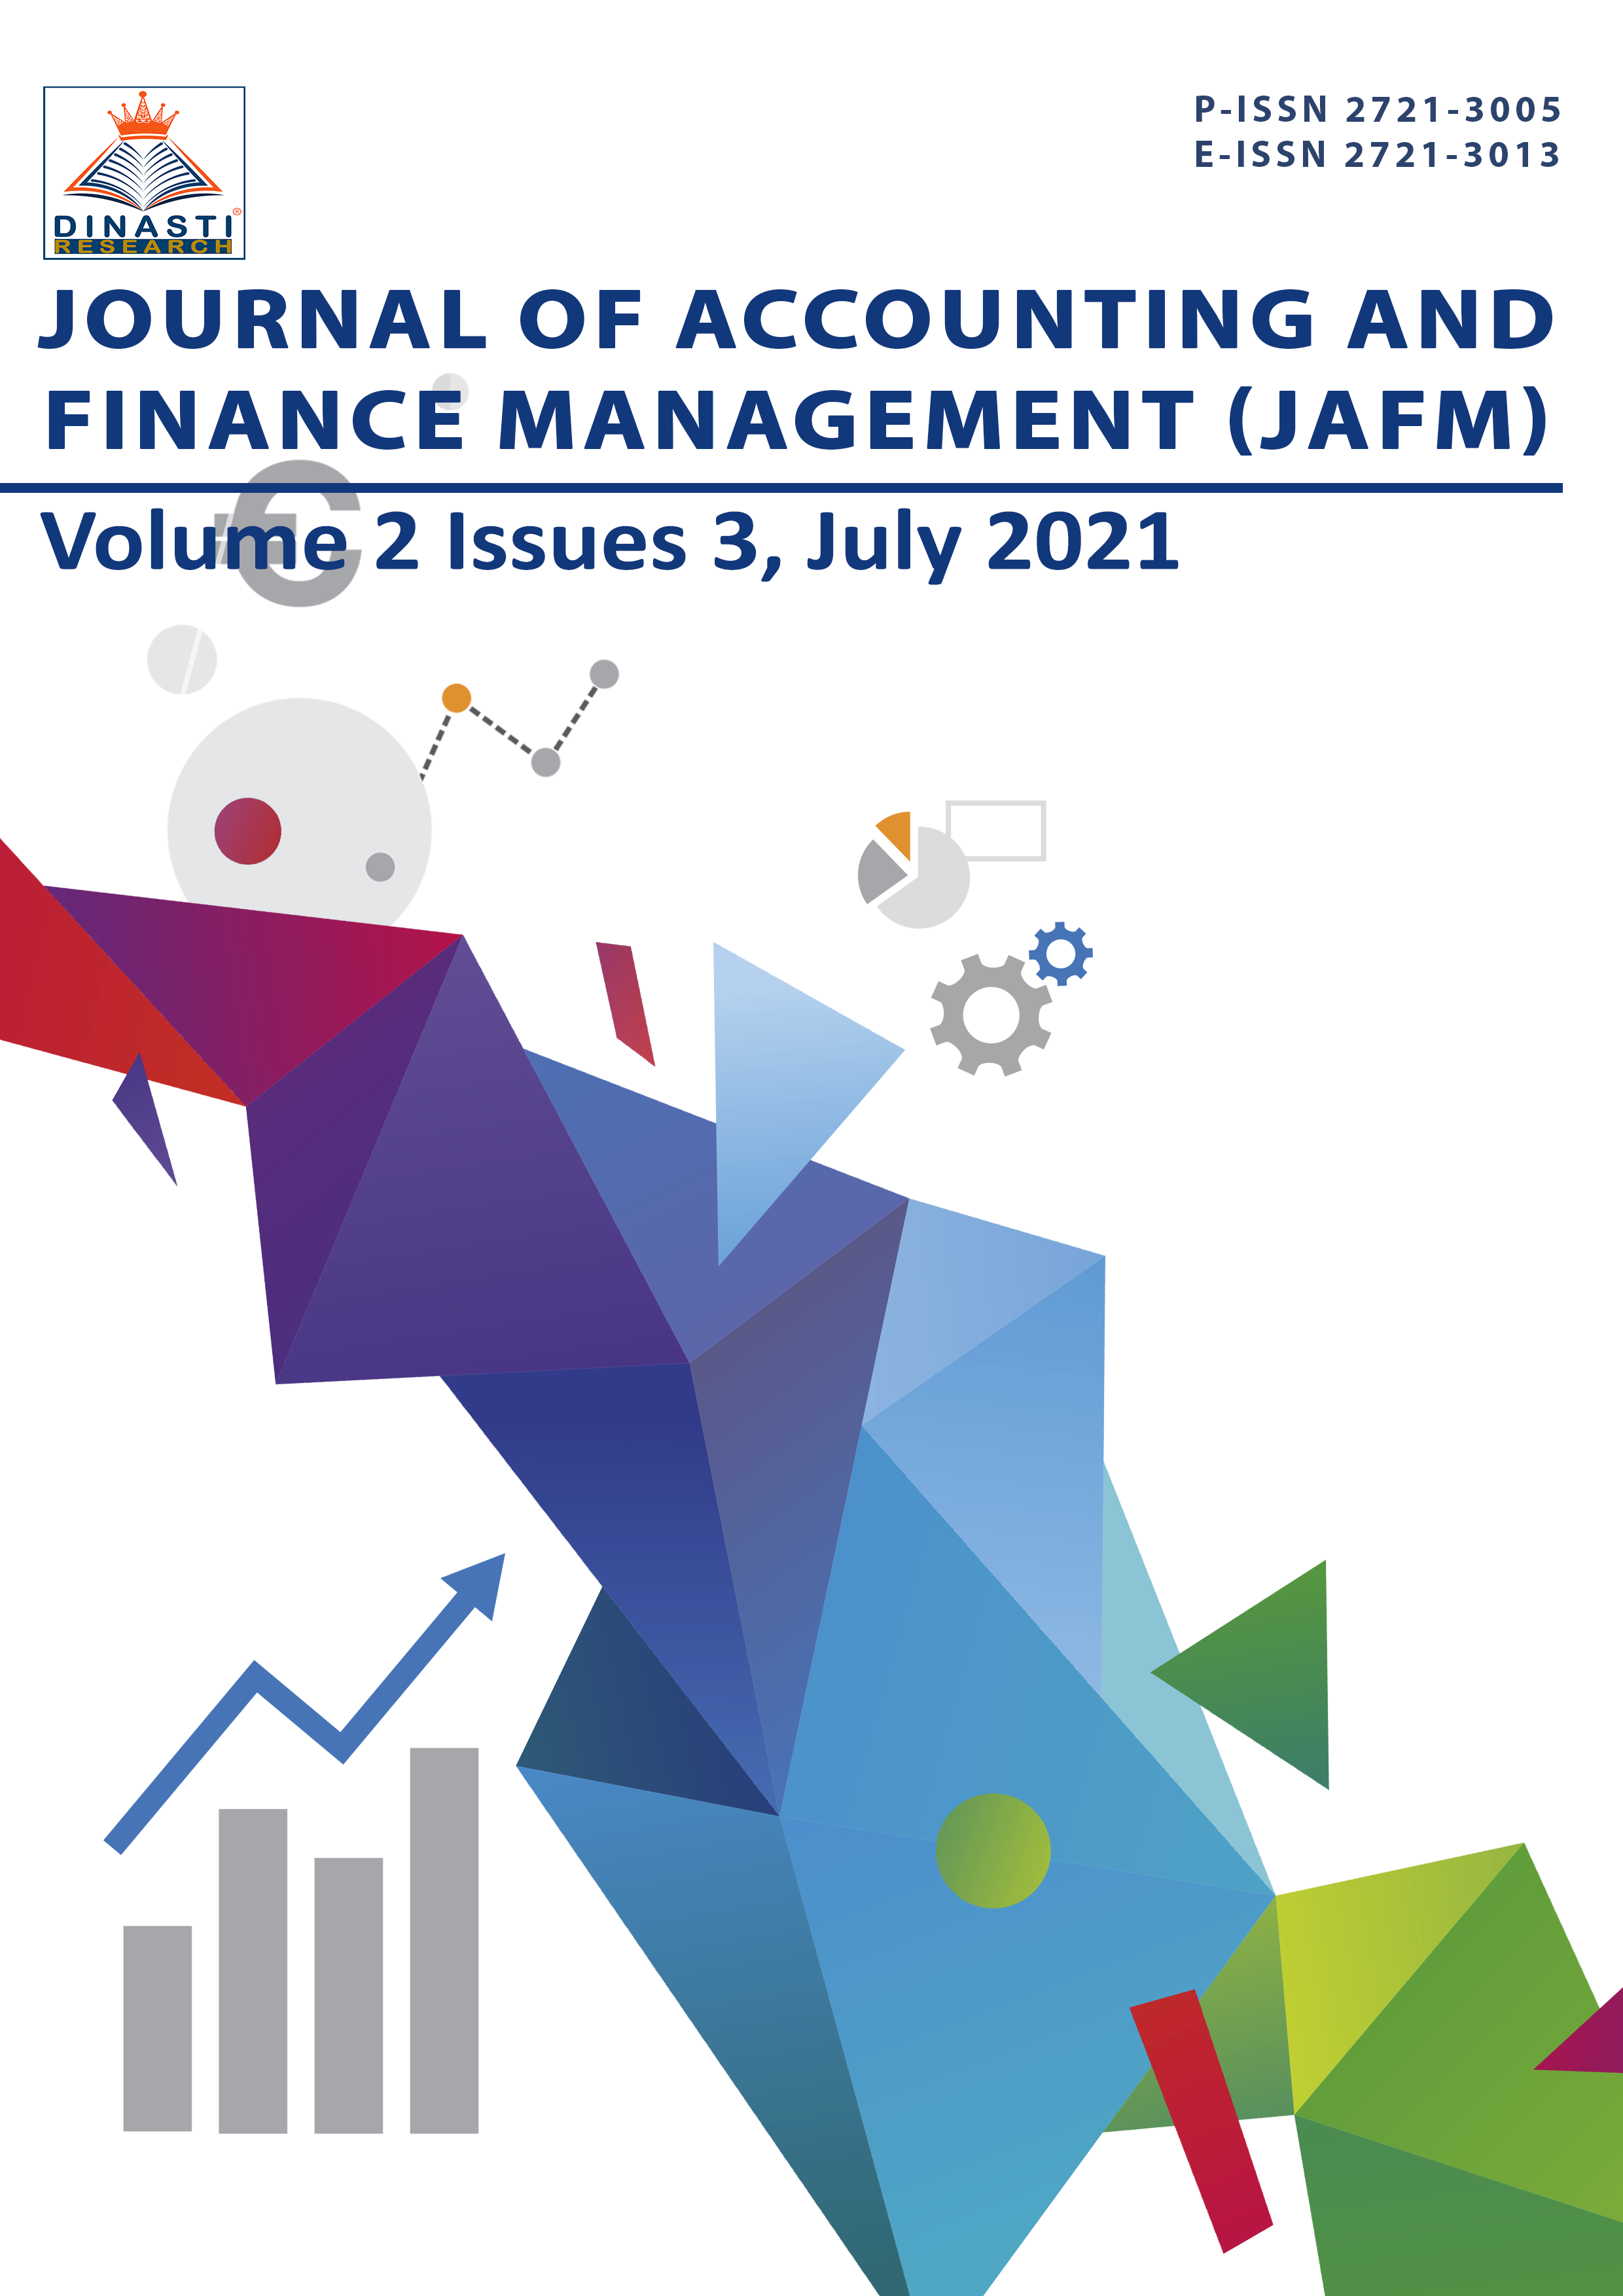 					View Vol. 2 No. 3 (2021): Journal of Accounting and Finance Management (July-August 2021)
				